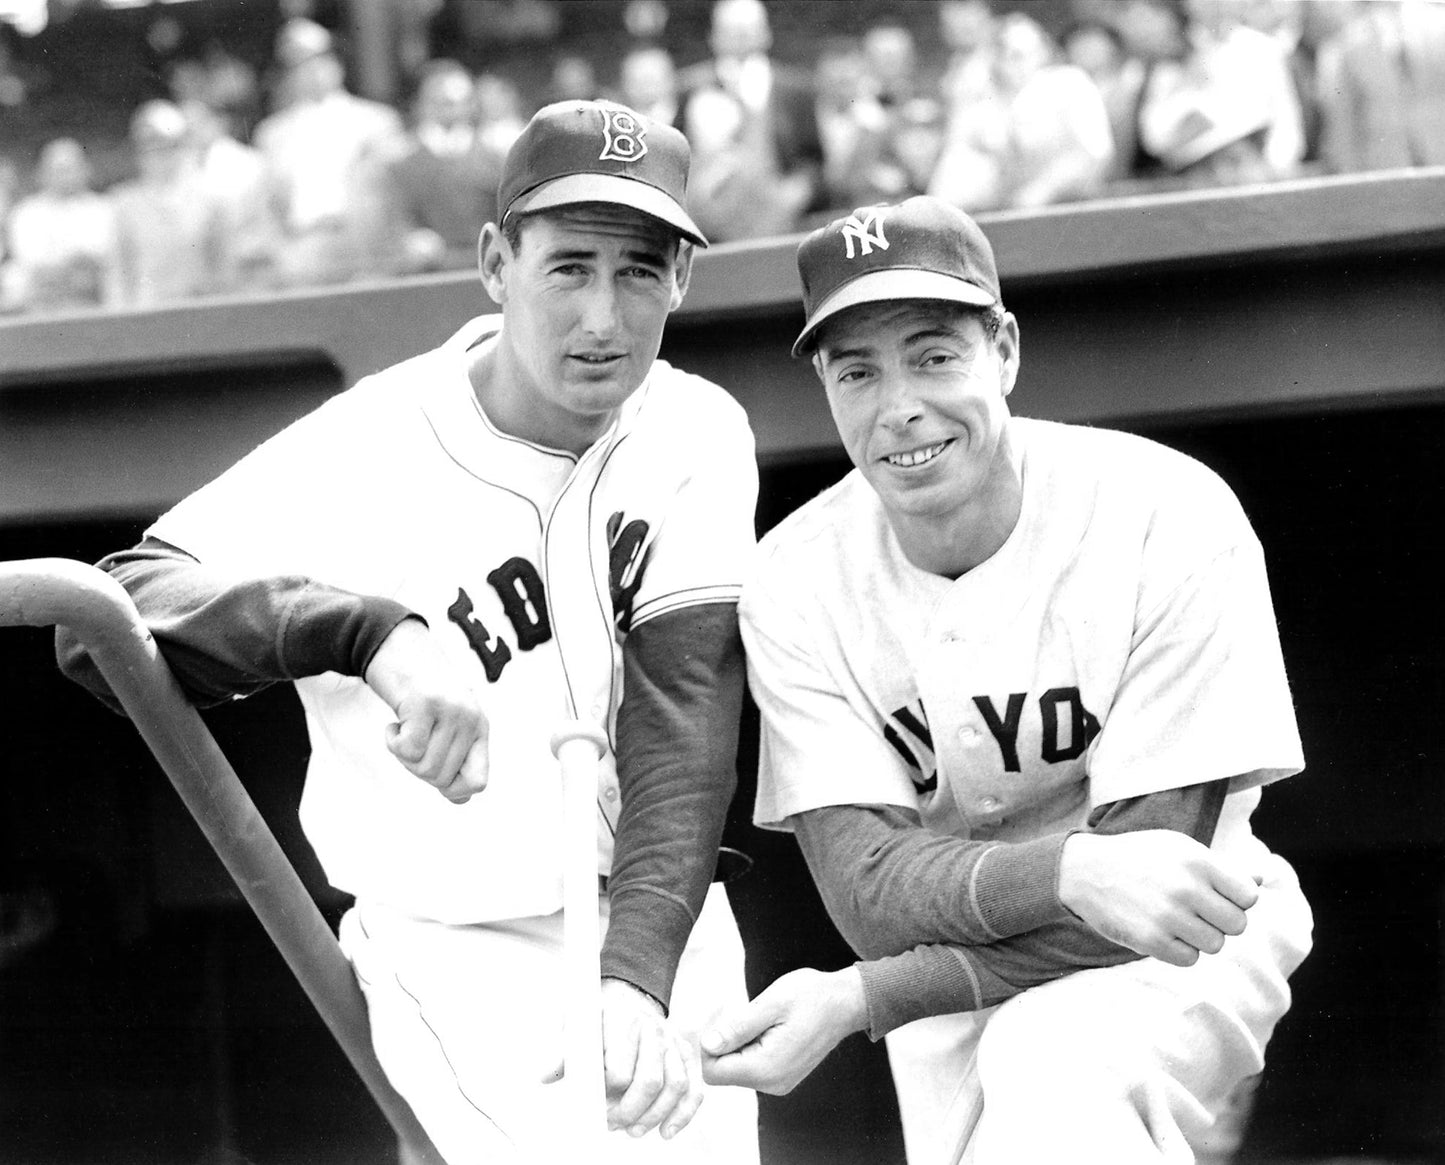 New York Yankees Joe DiMaggio & Boston Red Sox Ted Williams Together in 1951